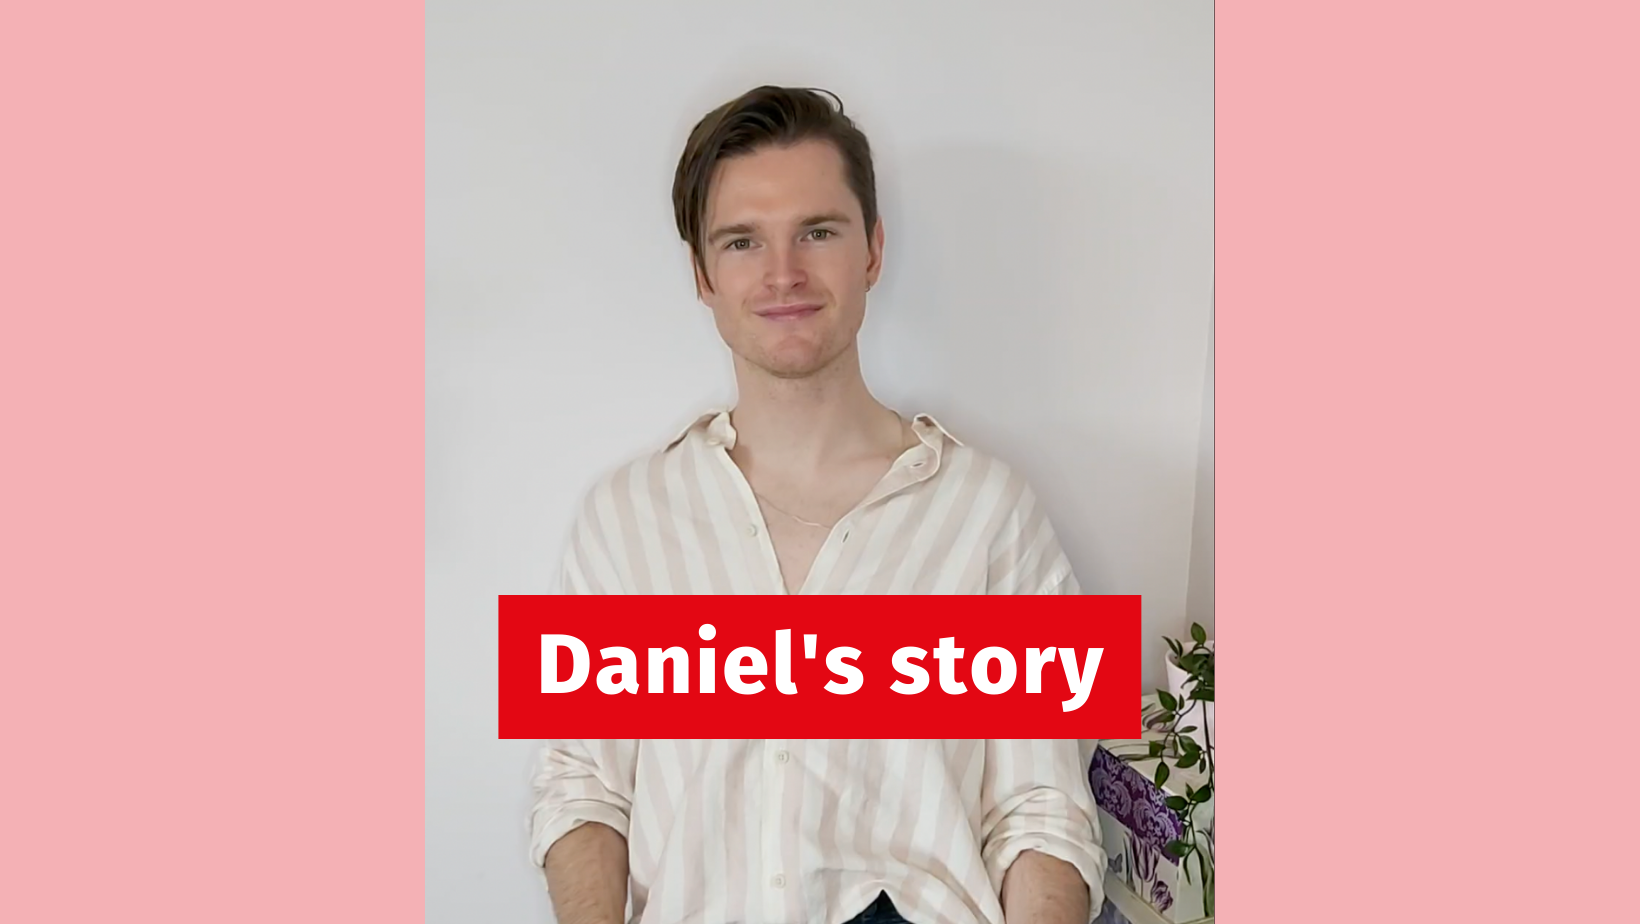 Daniel's Out Together story